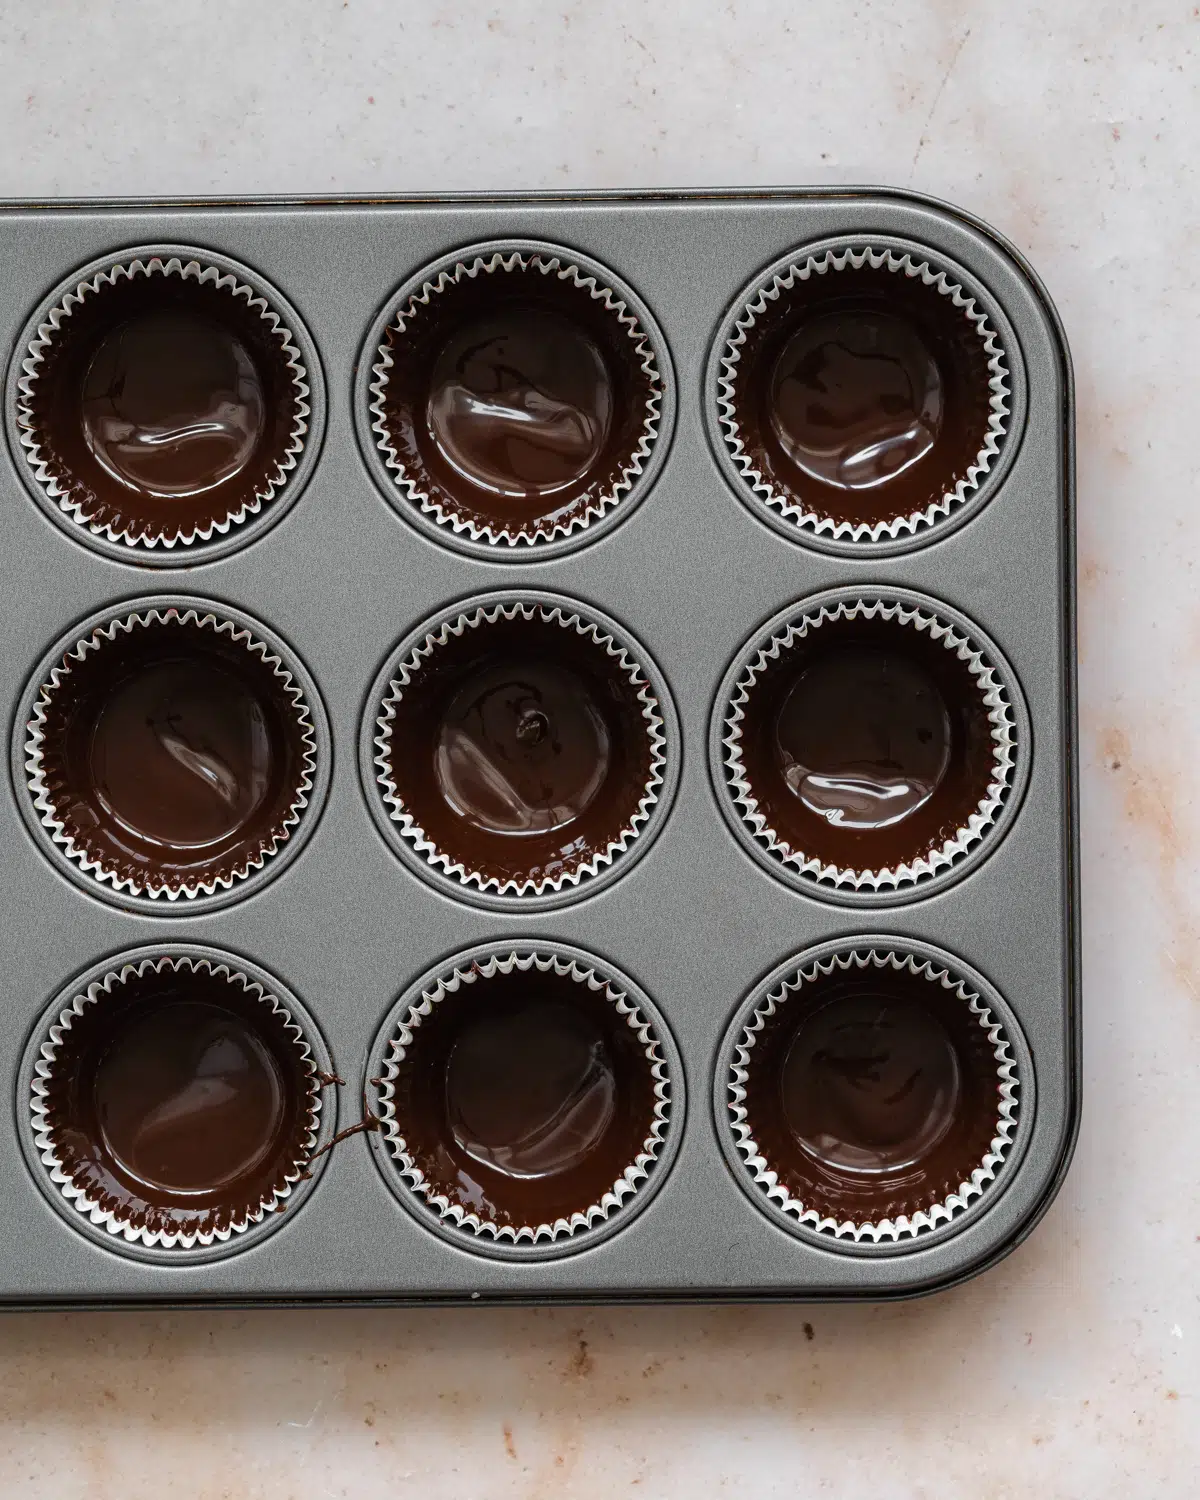 peanut butter chocolate cups in a muffin tray.